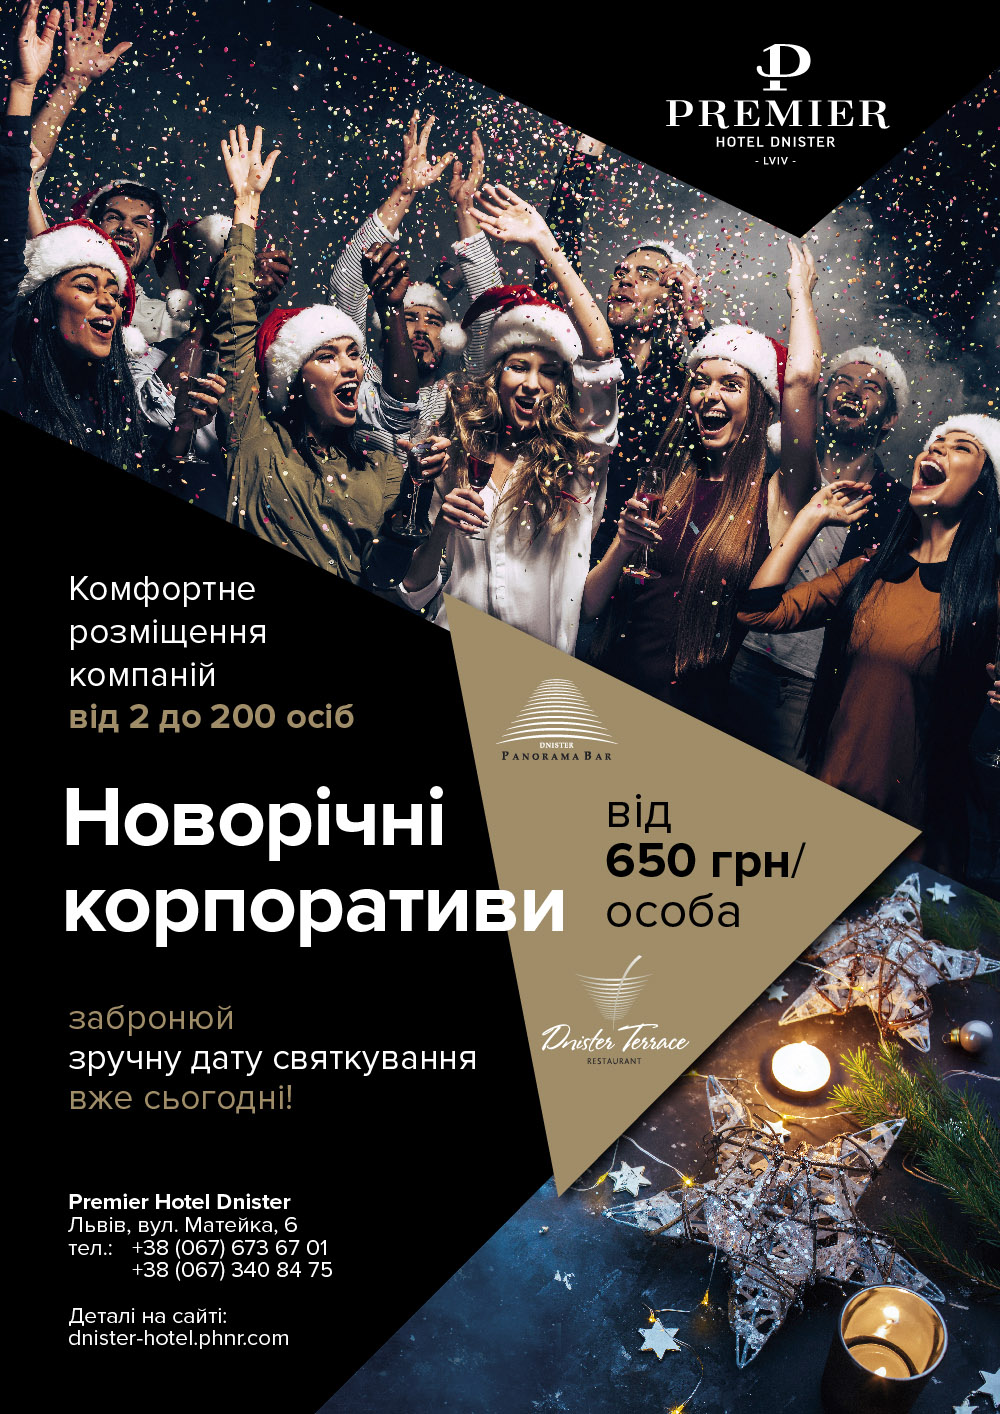 New Year Corporative Events in Lviv!